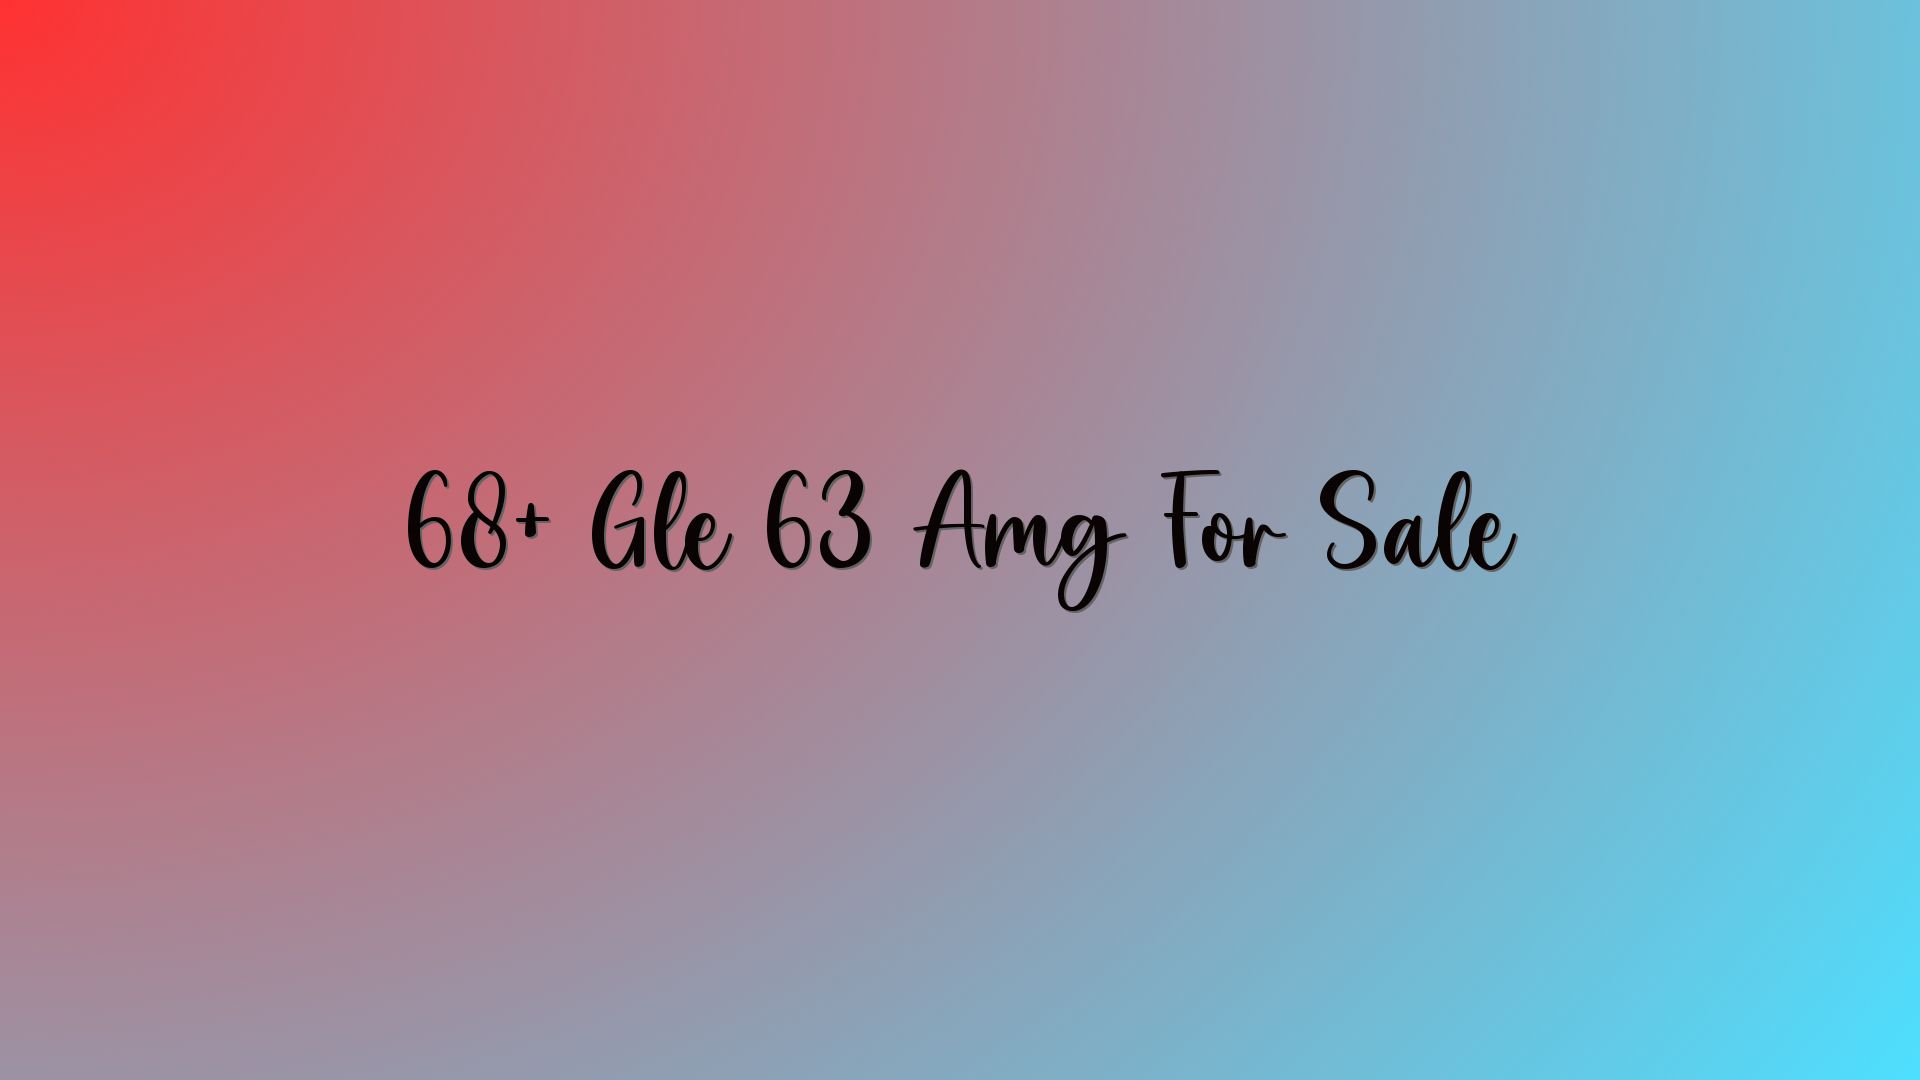 68+ Gle 63 Amg For Sale